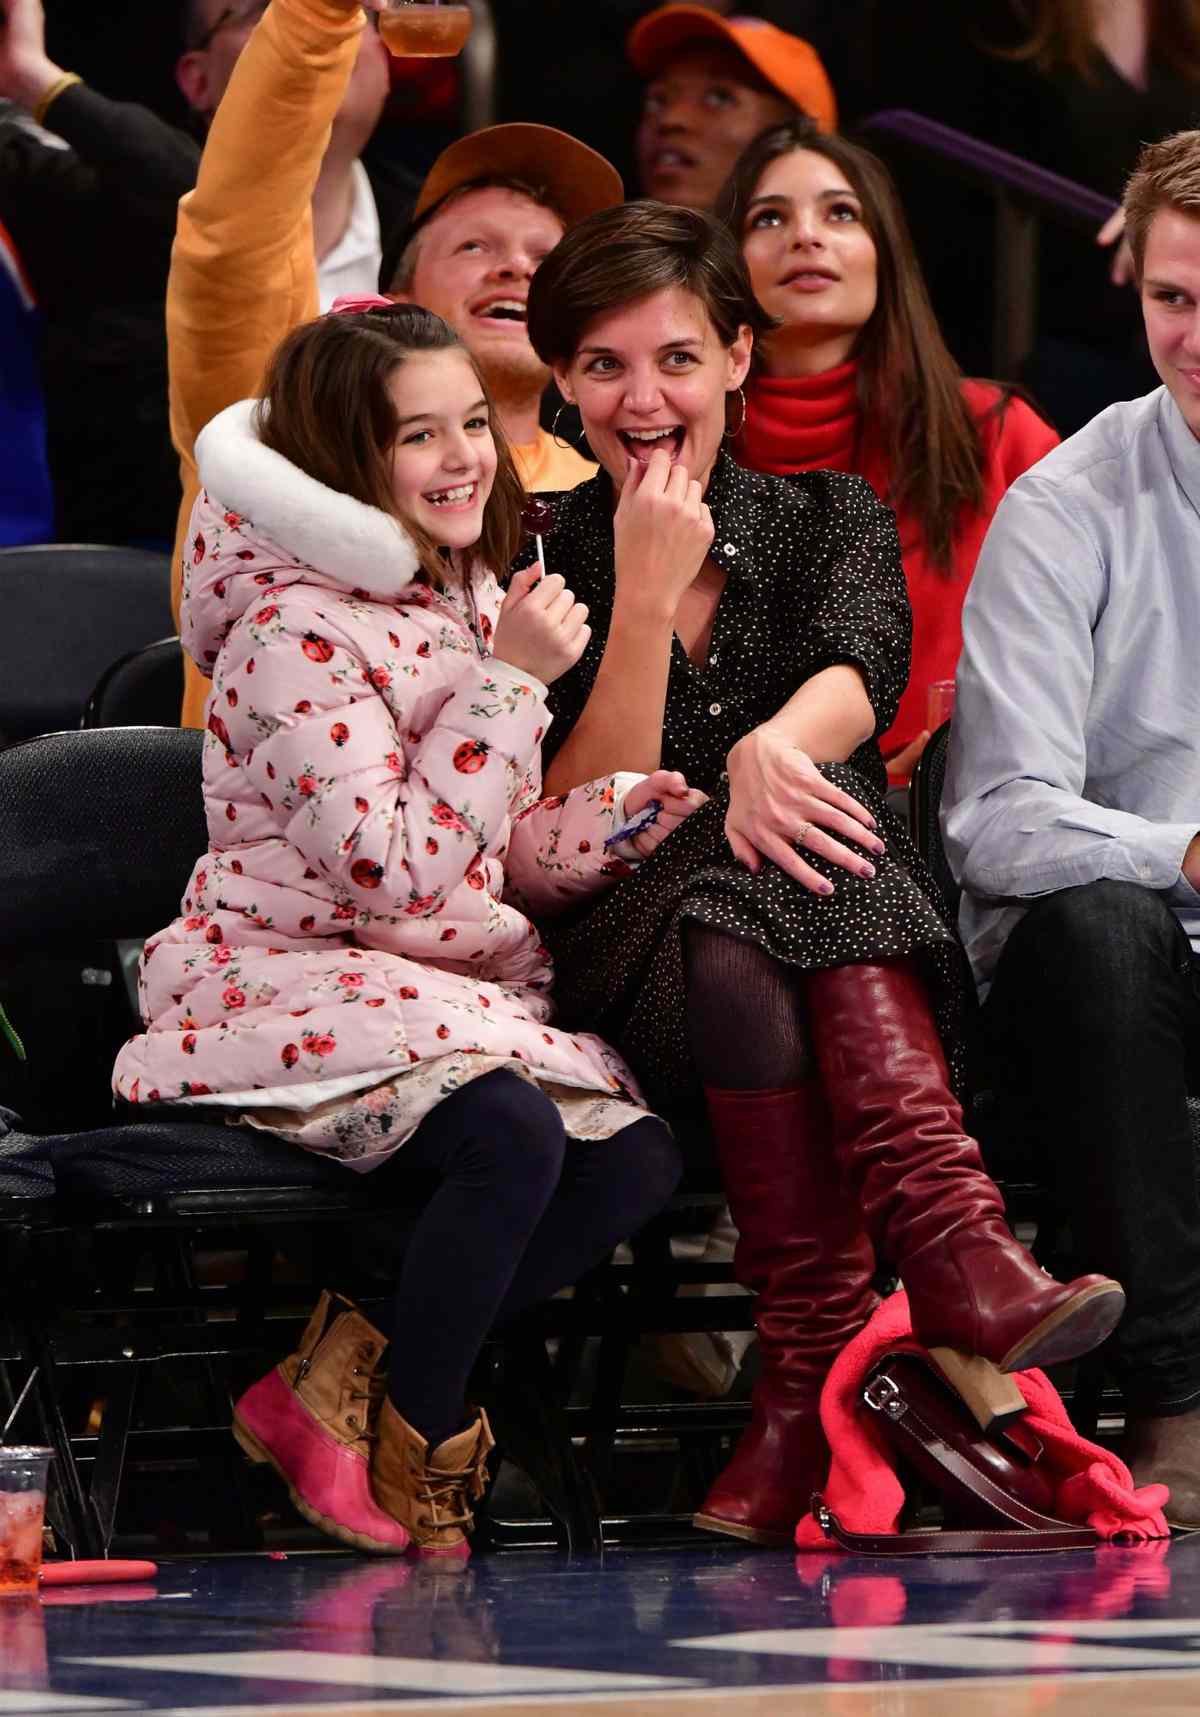 Suri Cruise and Katie Holmes at the Knicks game